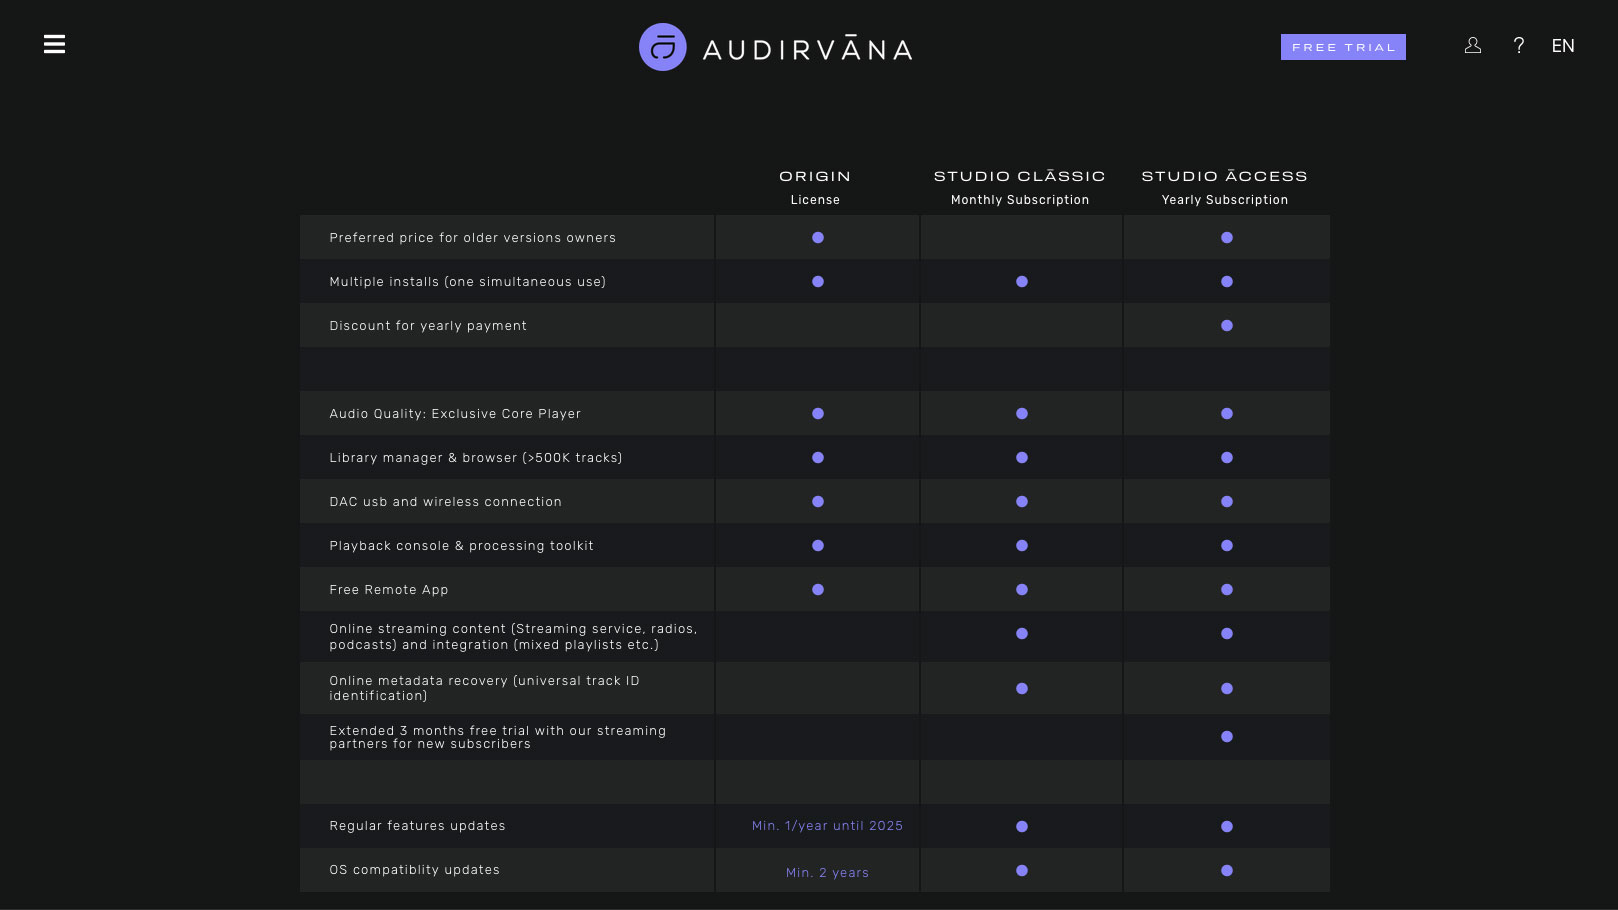 The various Audirvana versions and their features (Image Credit: Audirvana; Screenshot from https://audirvana.com/price/)